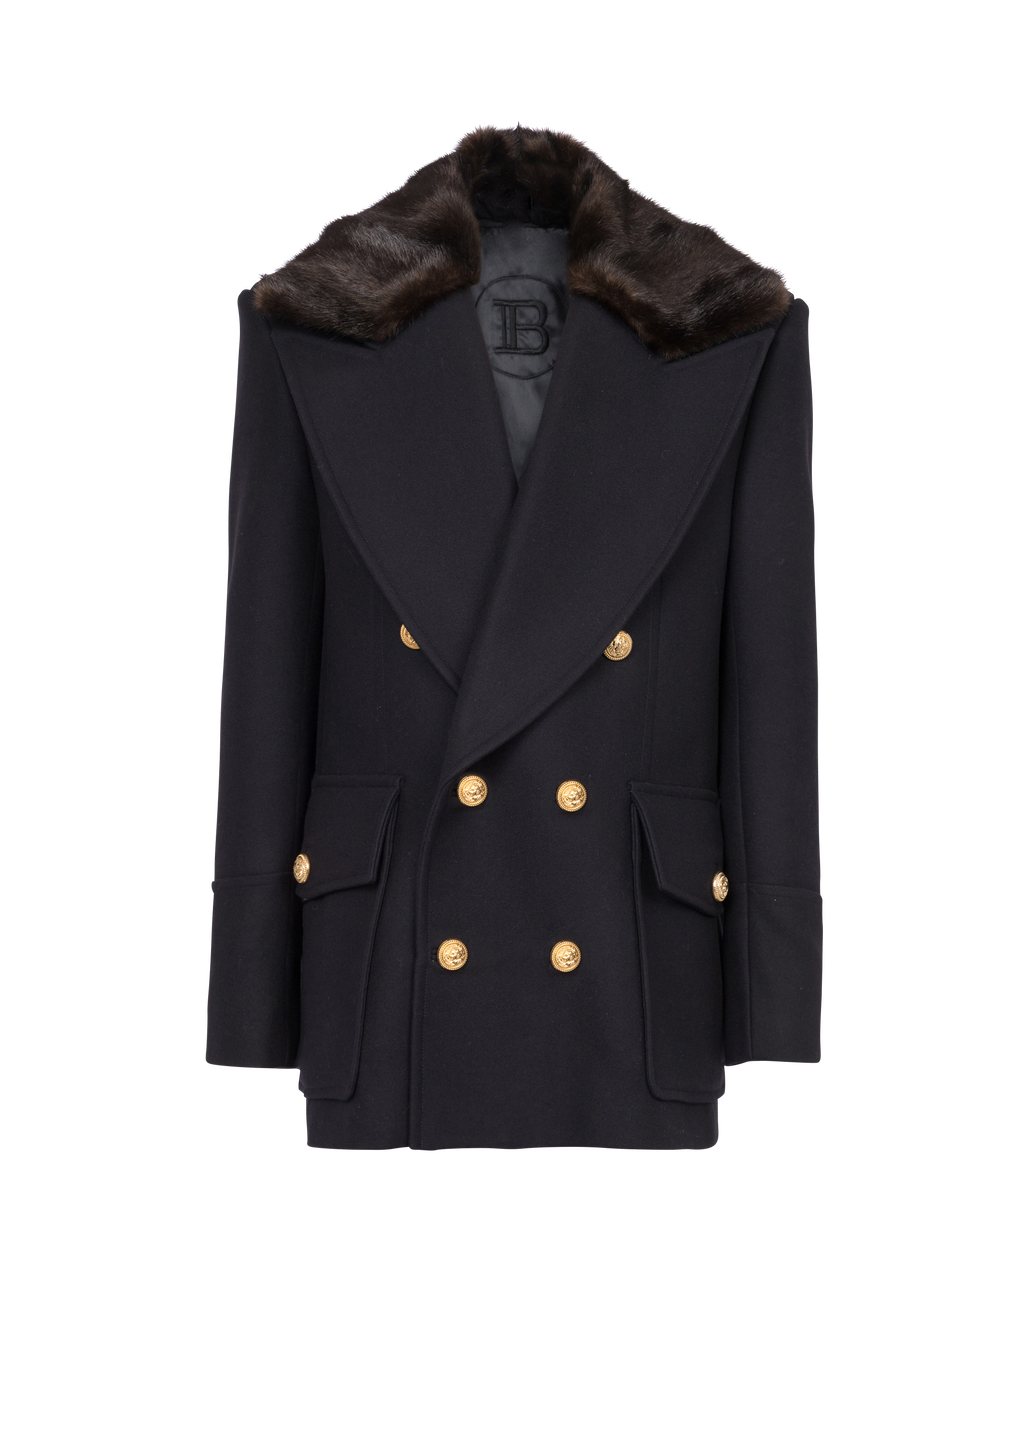 Unisex - Six-button wool coat with detachable collar, navy, hi-res